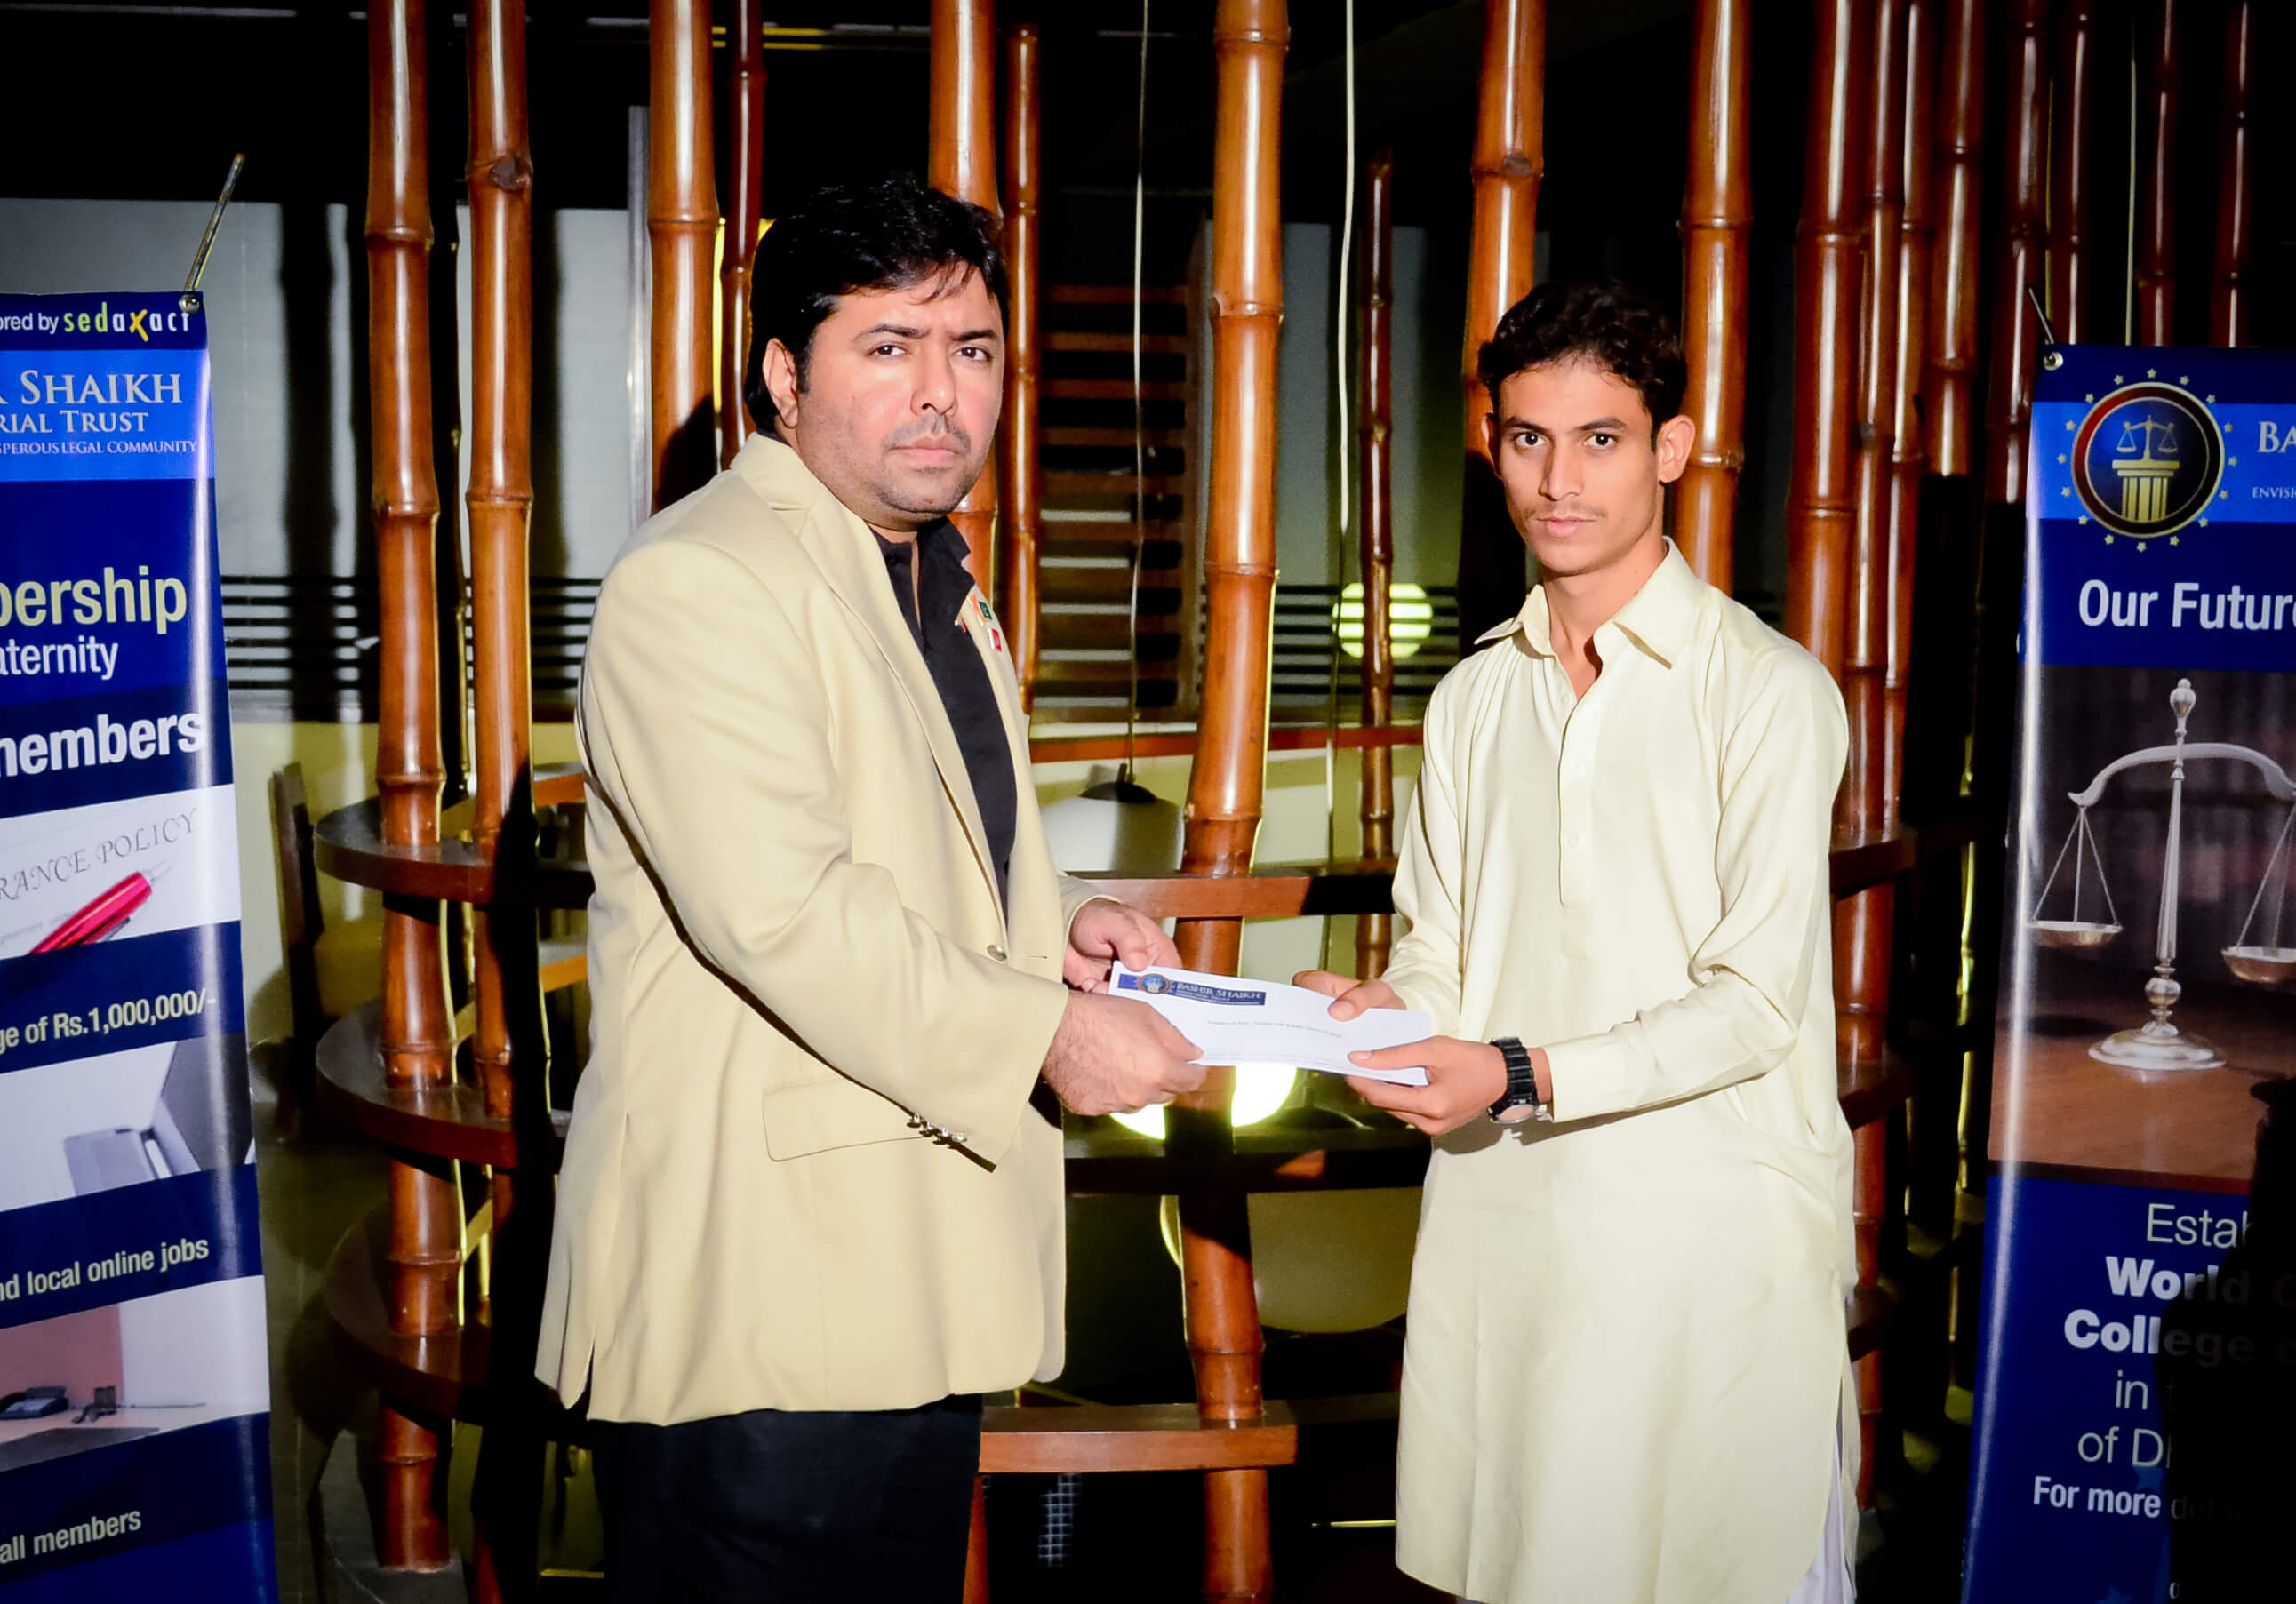 Mr.Shoaib Ahmed Shaikh, Chairman, BSMT, presenting a cheque to the family member of the deceased member.